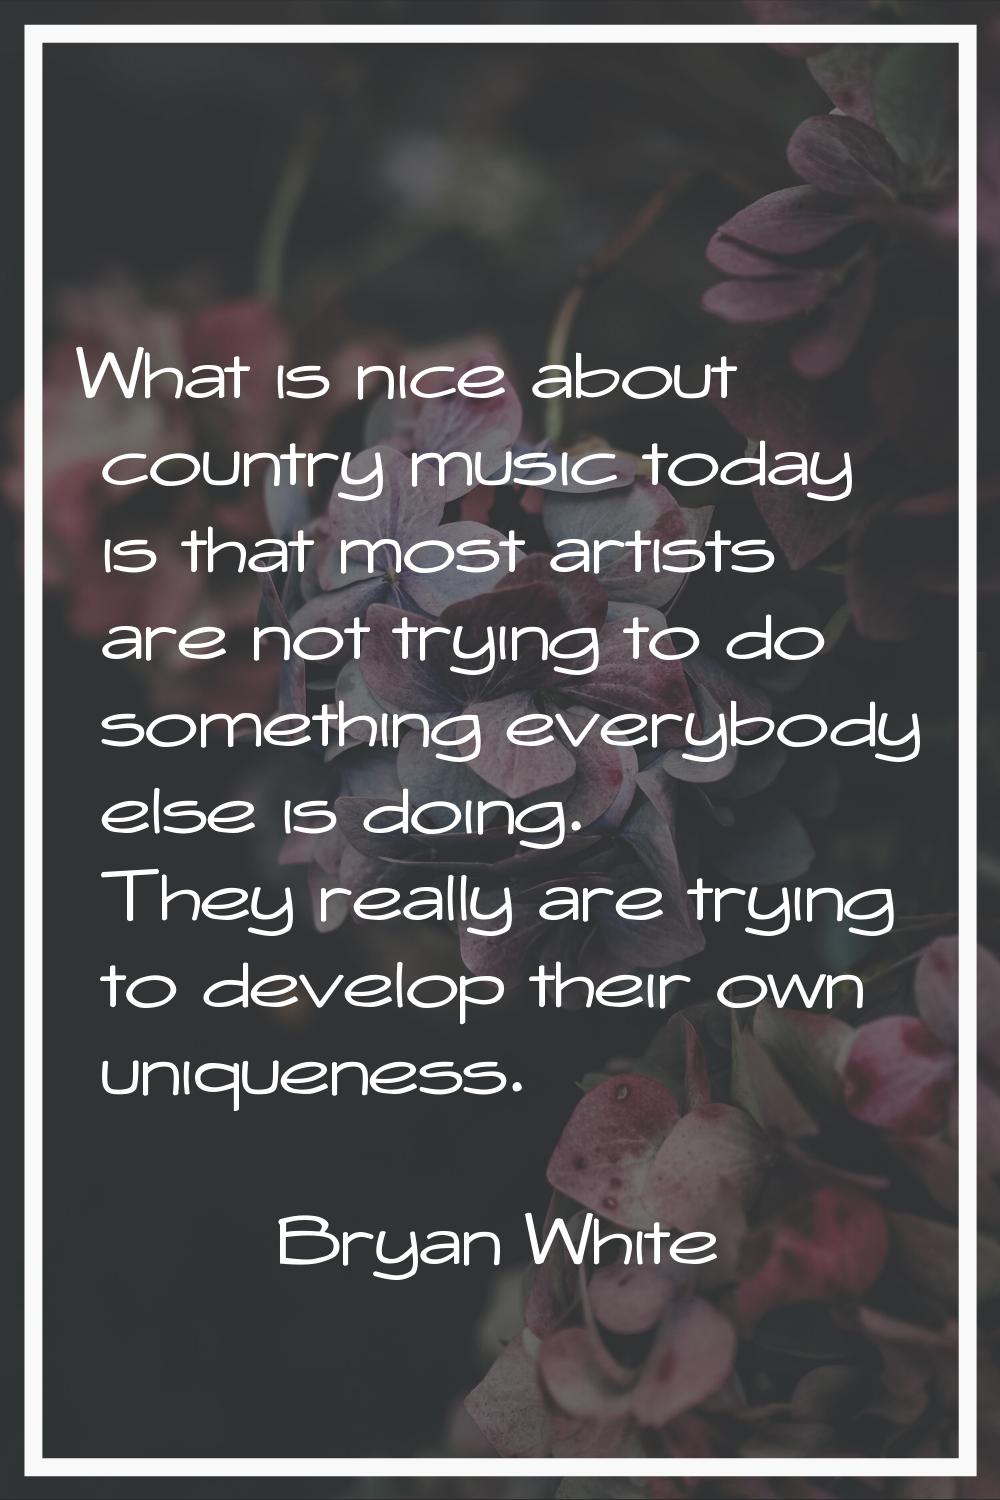 What is nice about country music today is that most artists are not trying to do something everybod